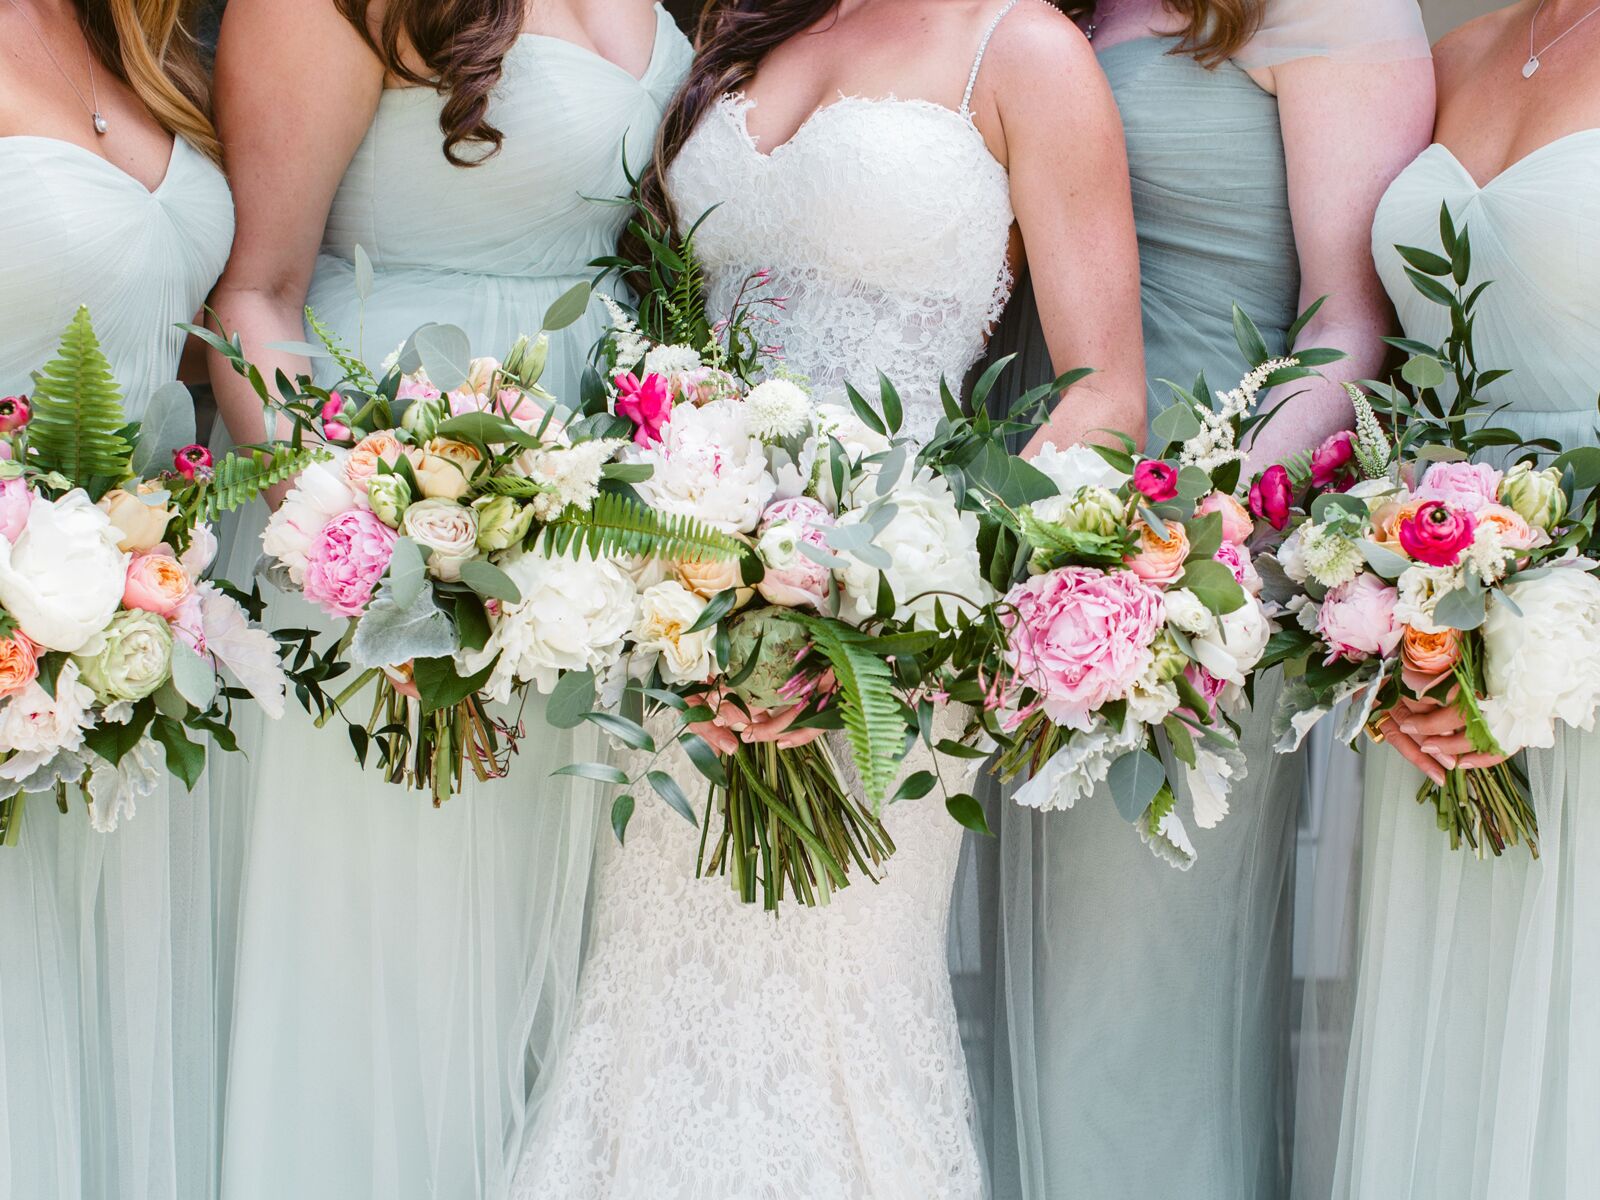 Bride with bridesmaids holding bouquets